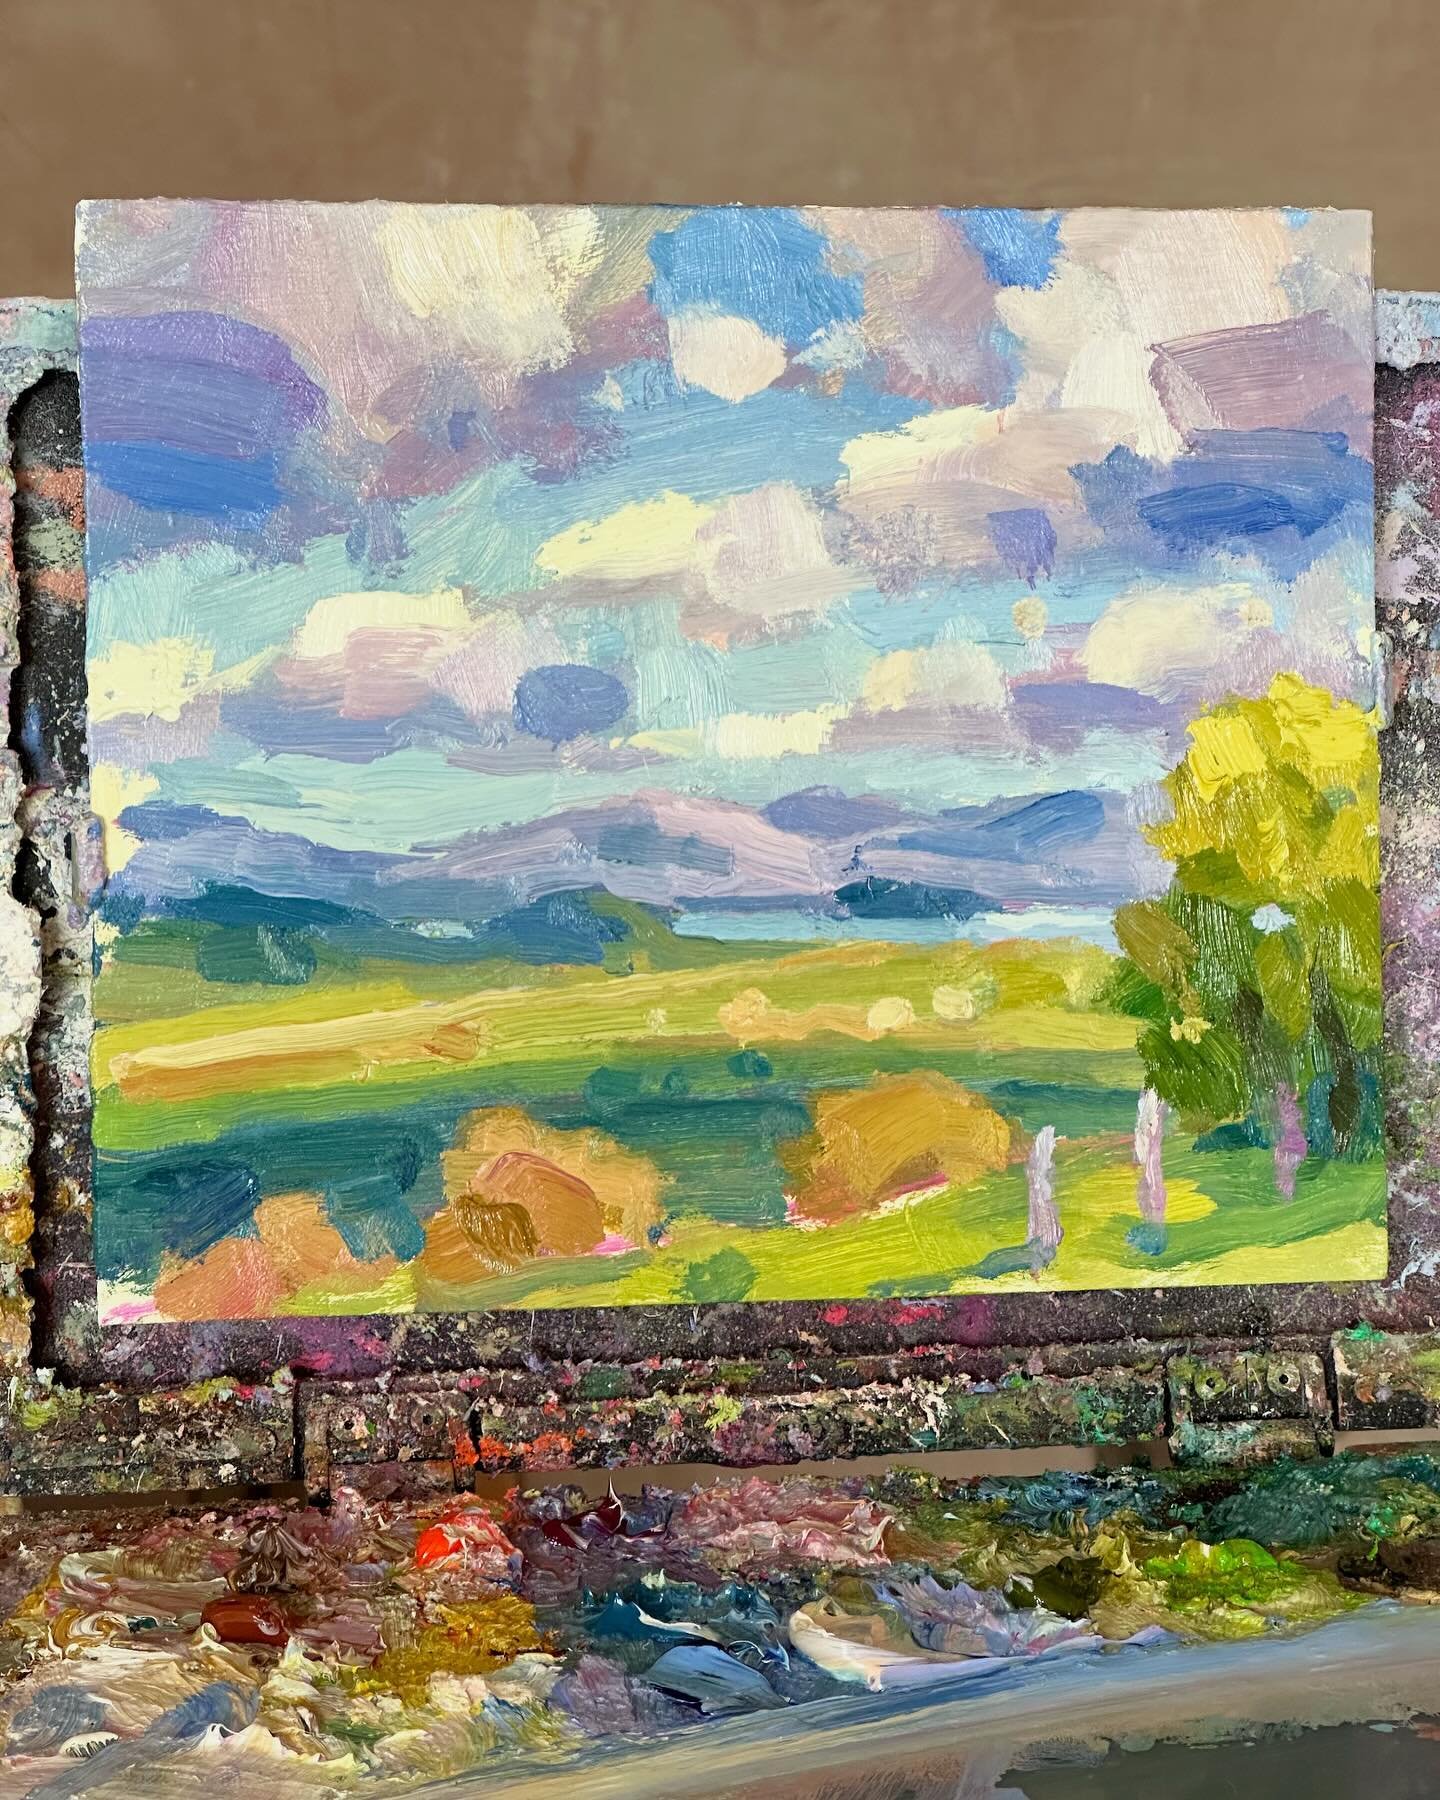 Back from Snowdonia with huge vistas and big clouds drifting through my head at night. Had to give this view another paint, using my plein air painting as ref just mixing up the colours and light a bit. Want to make this BIG next. 

Next stop: Devon 